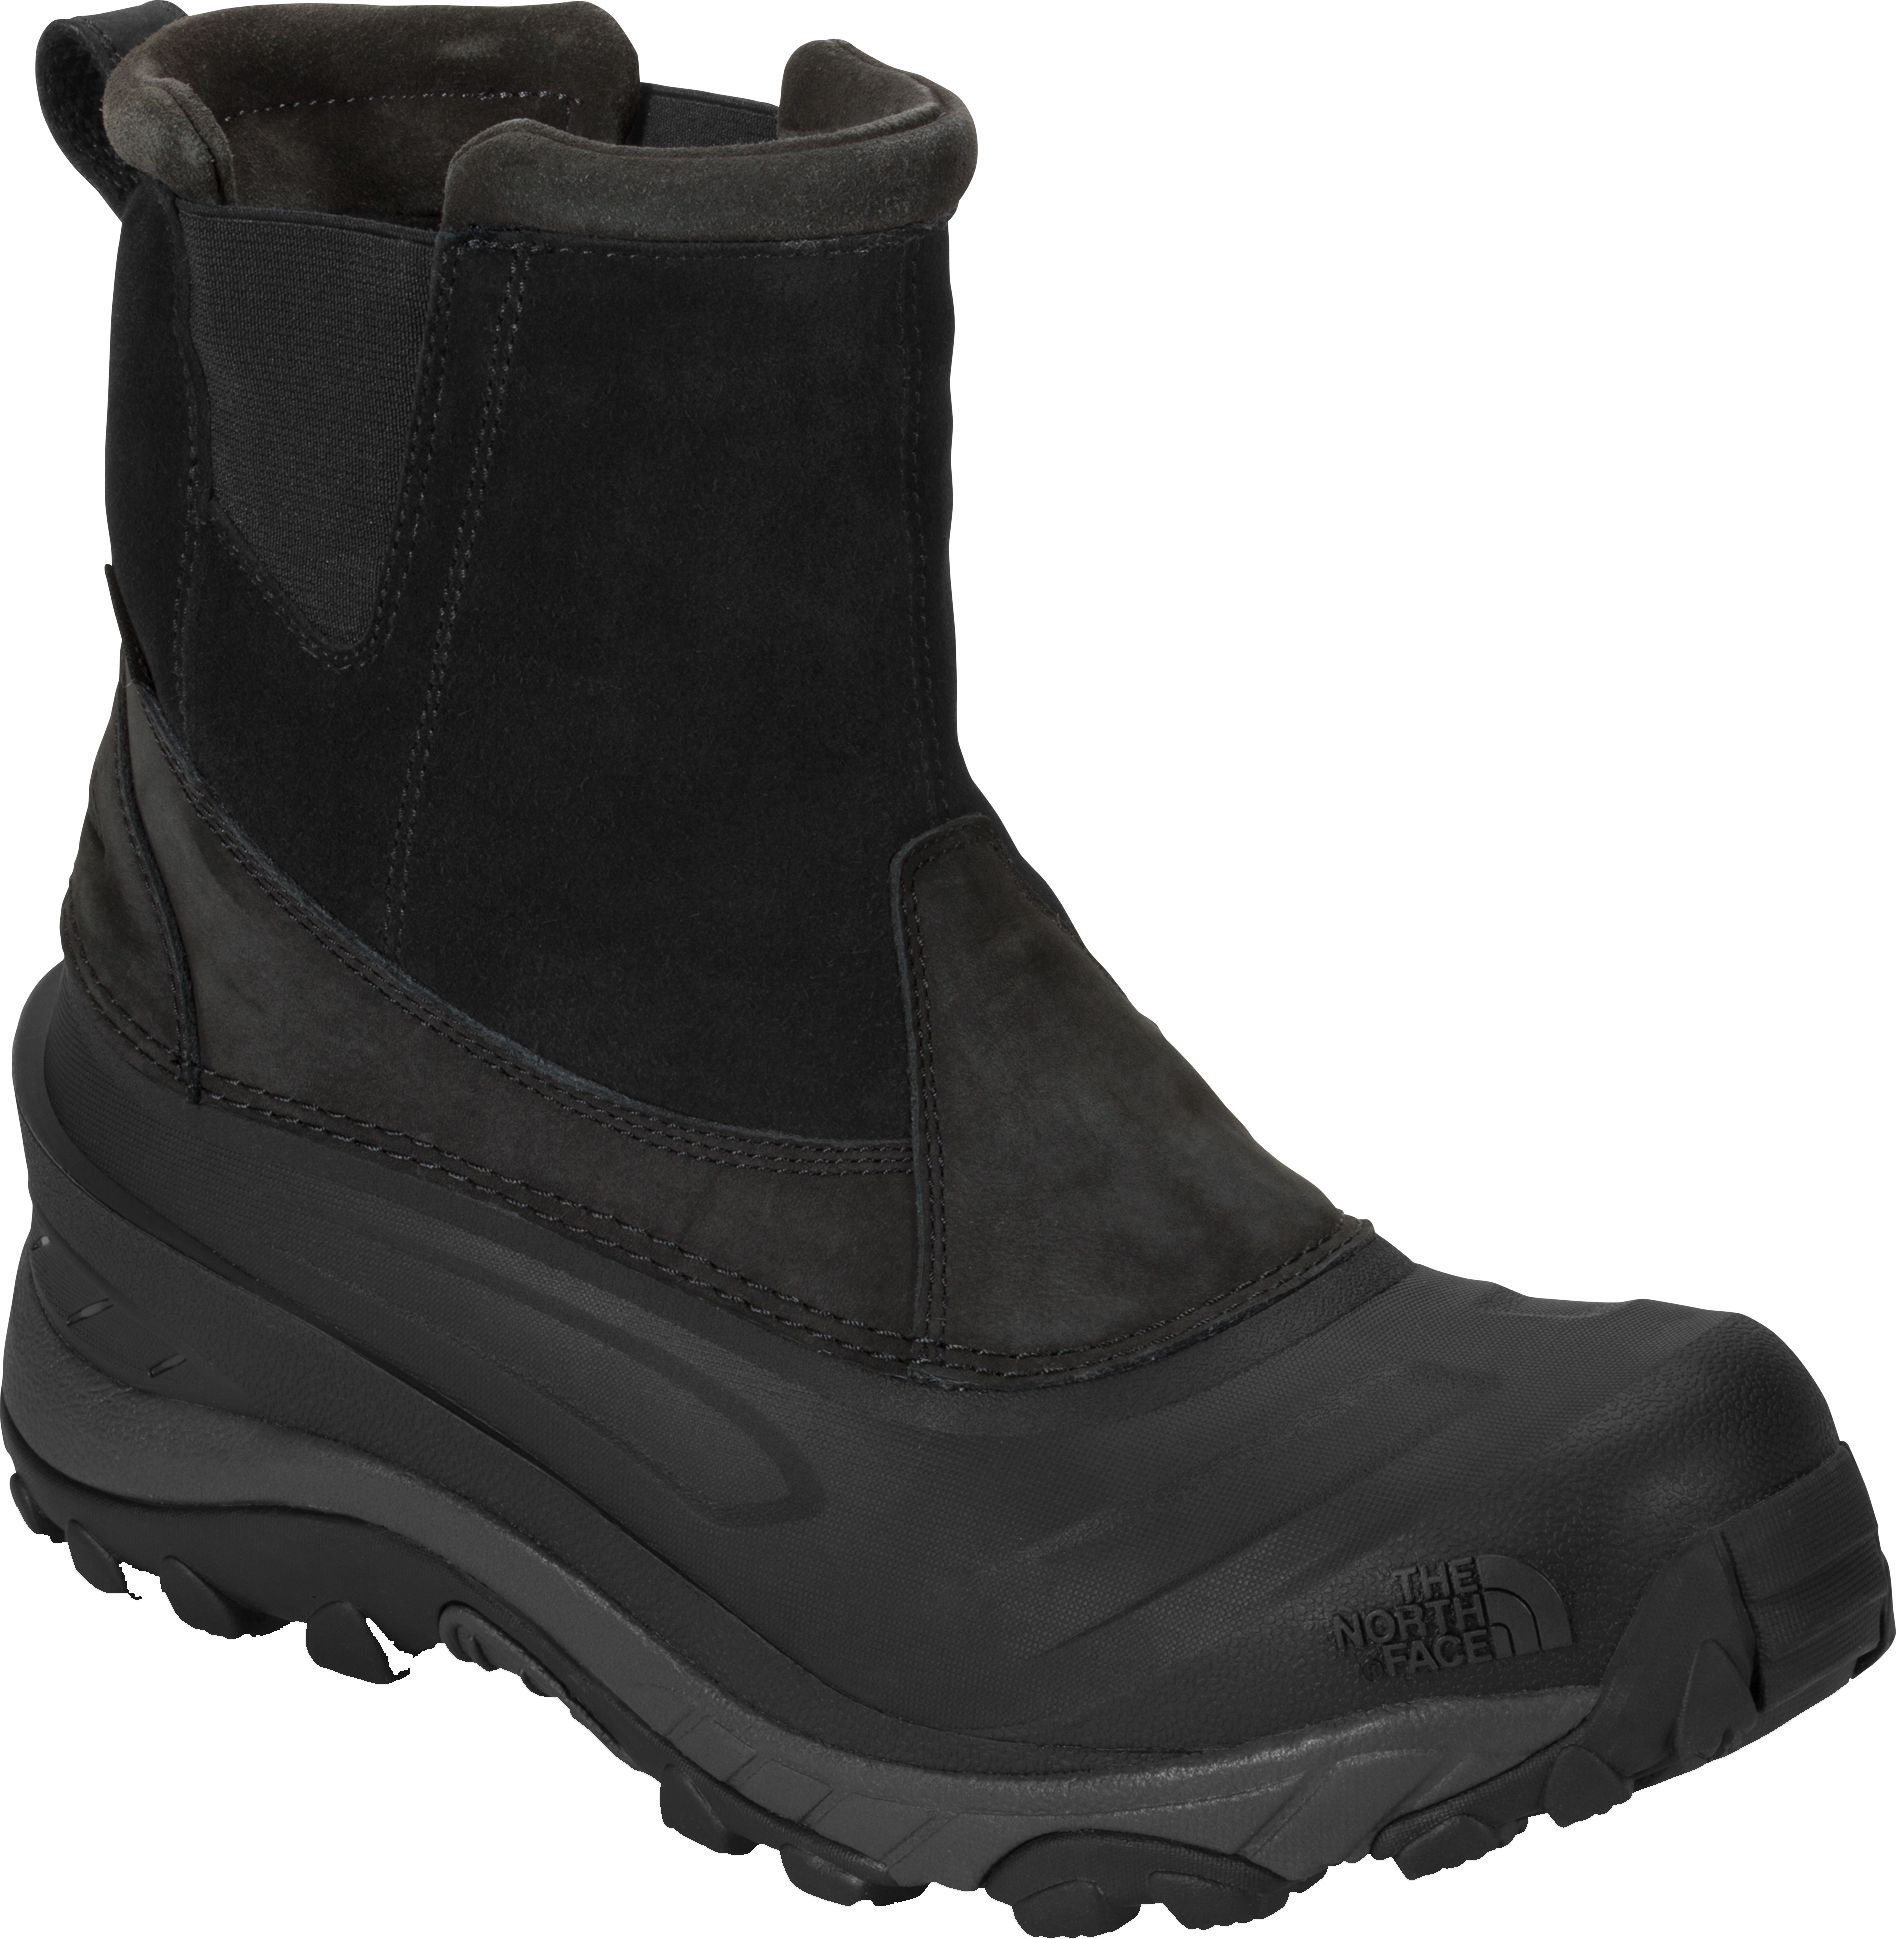 mens waterproof pull on boots